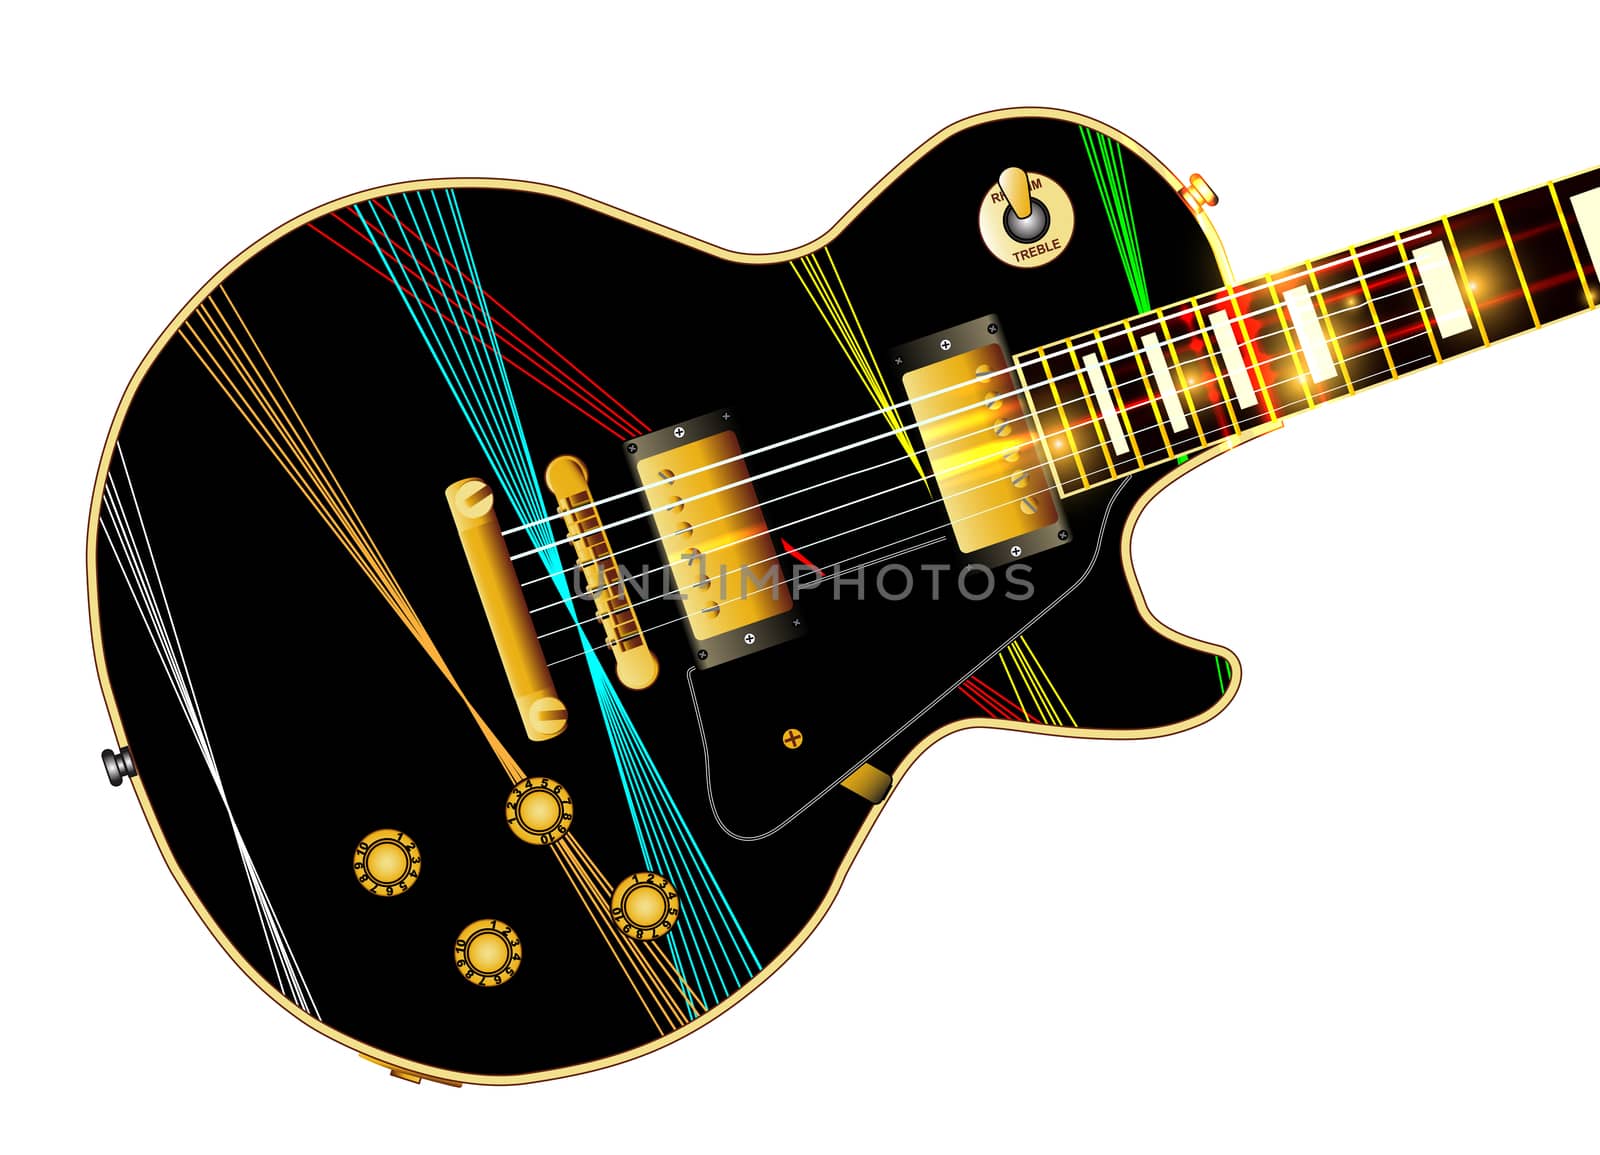 The definitive rock and roll guitar with laxer beam pattern isolated over a white background.